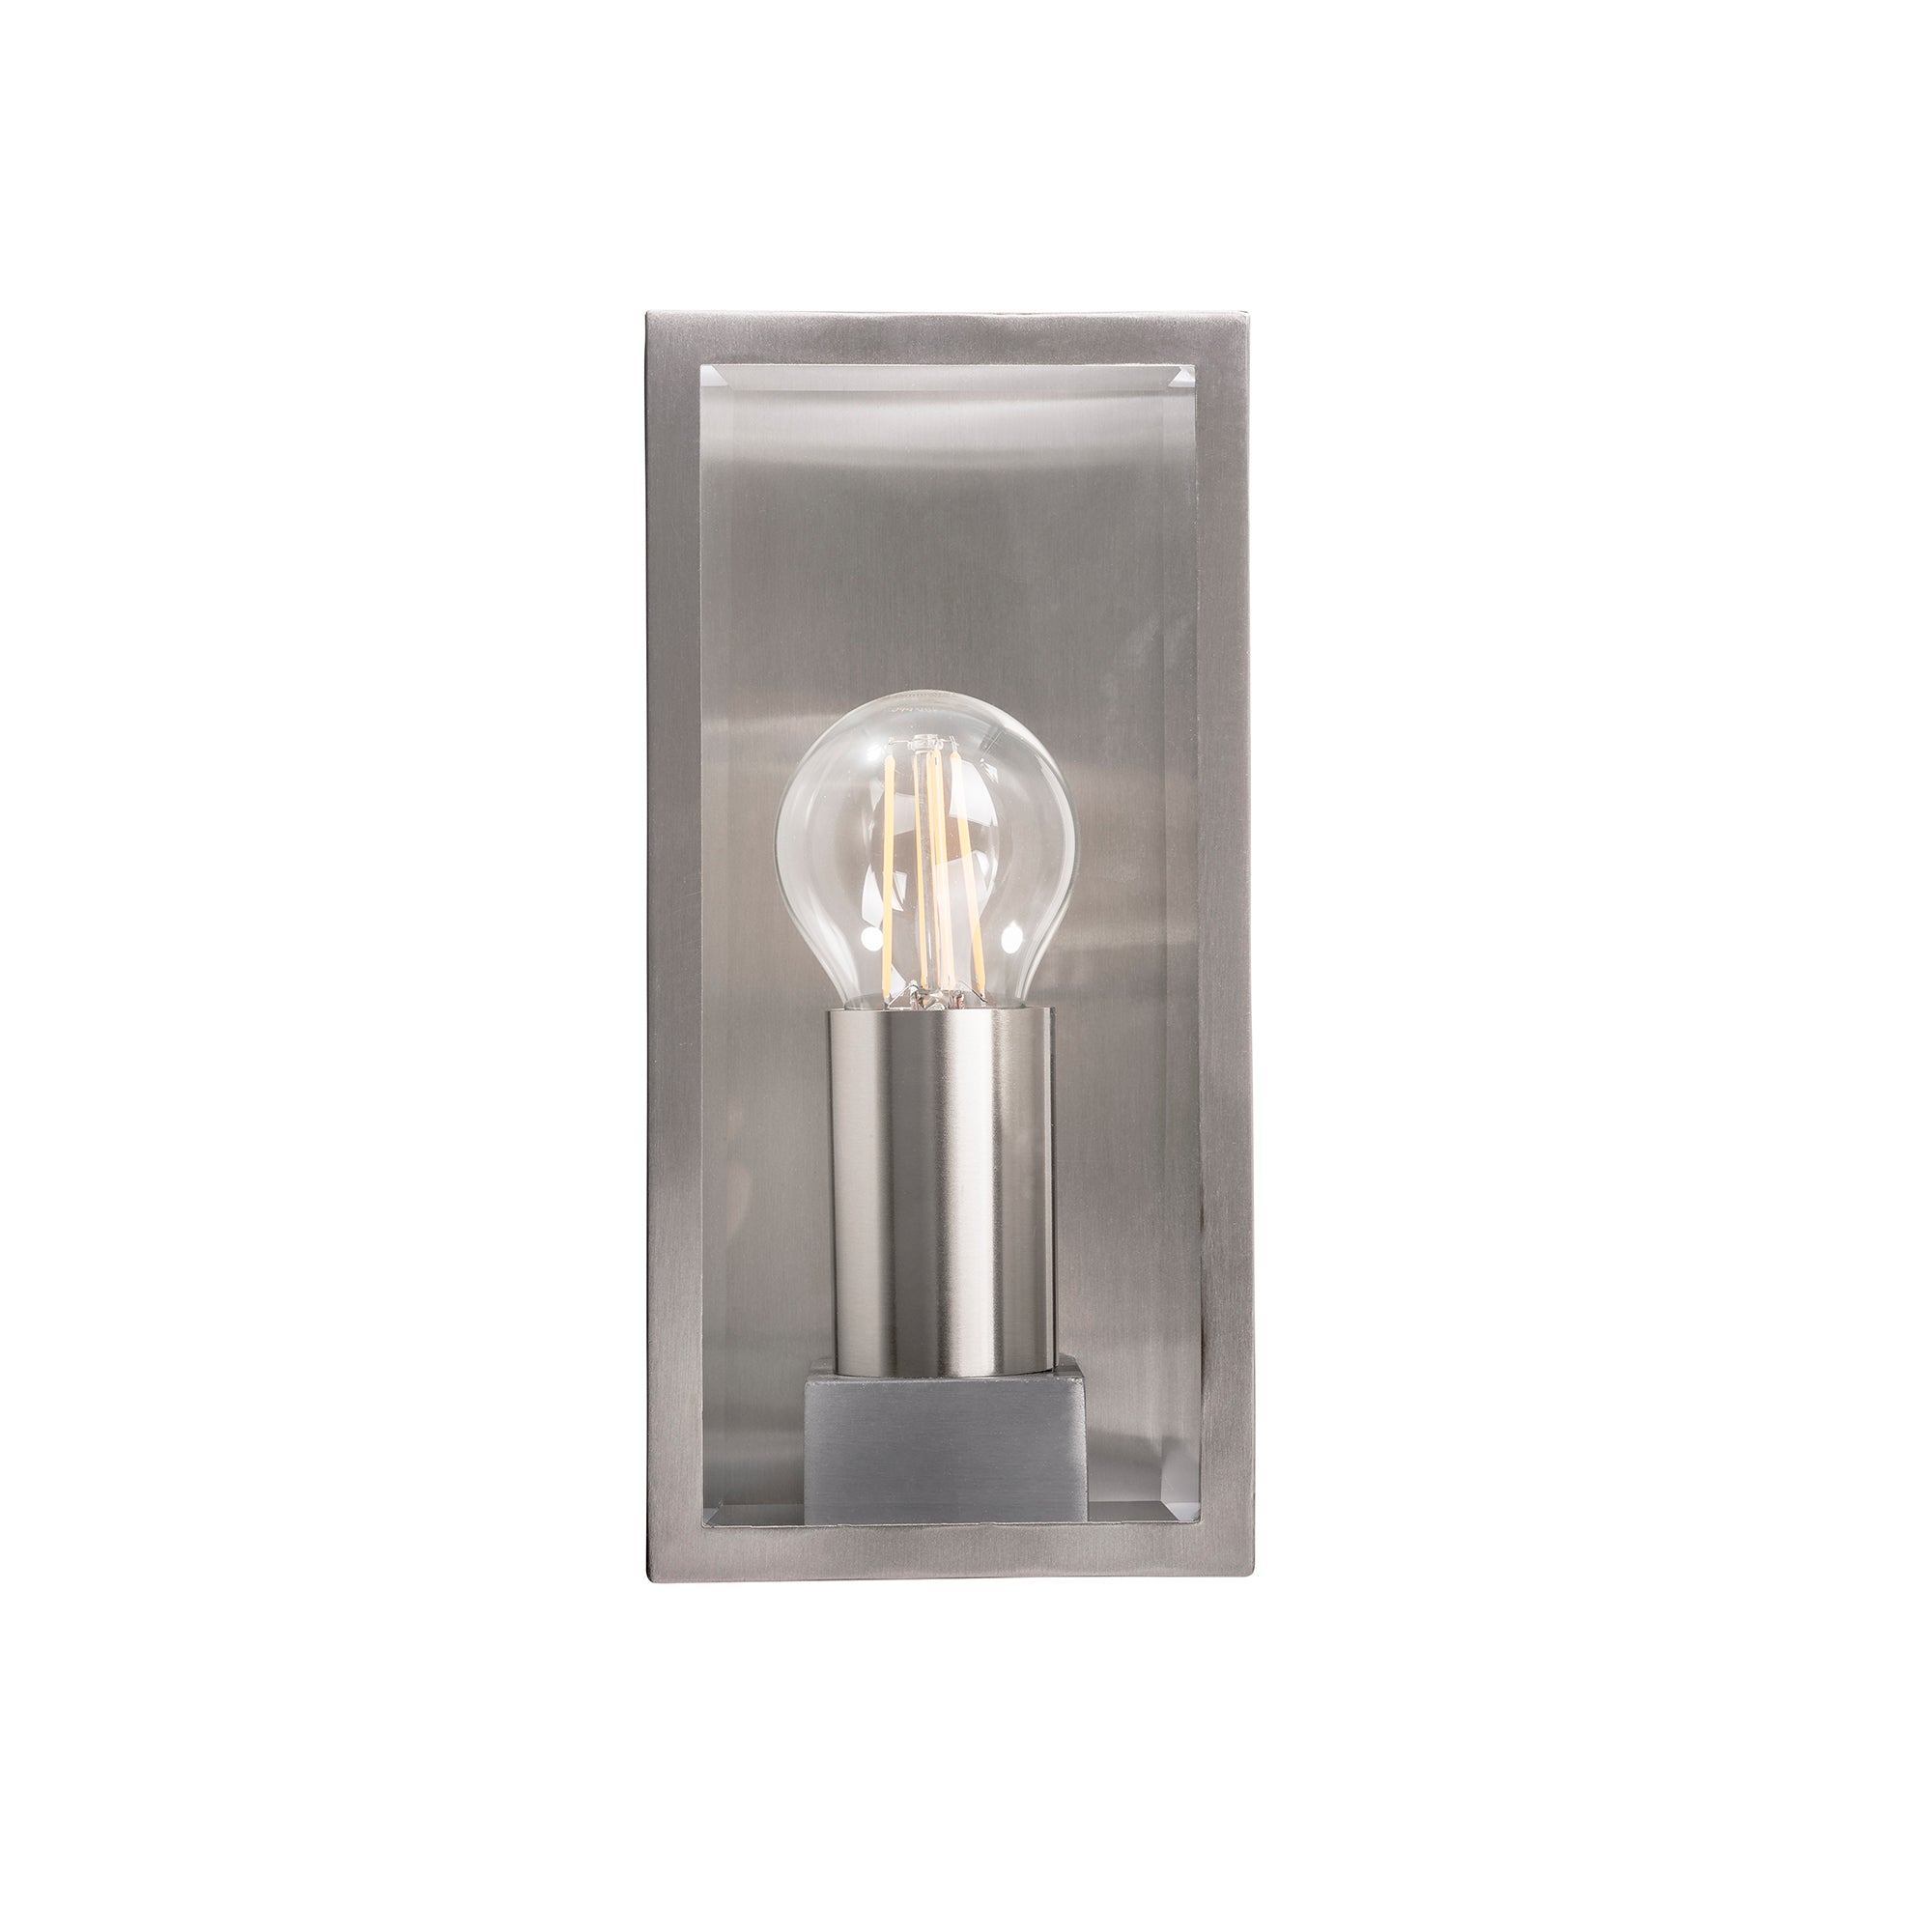 HV3659W-SS316 - Bayside 316 Stainless Steel Wall Light